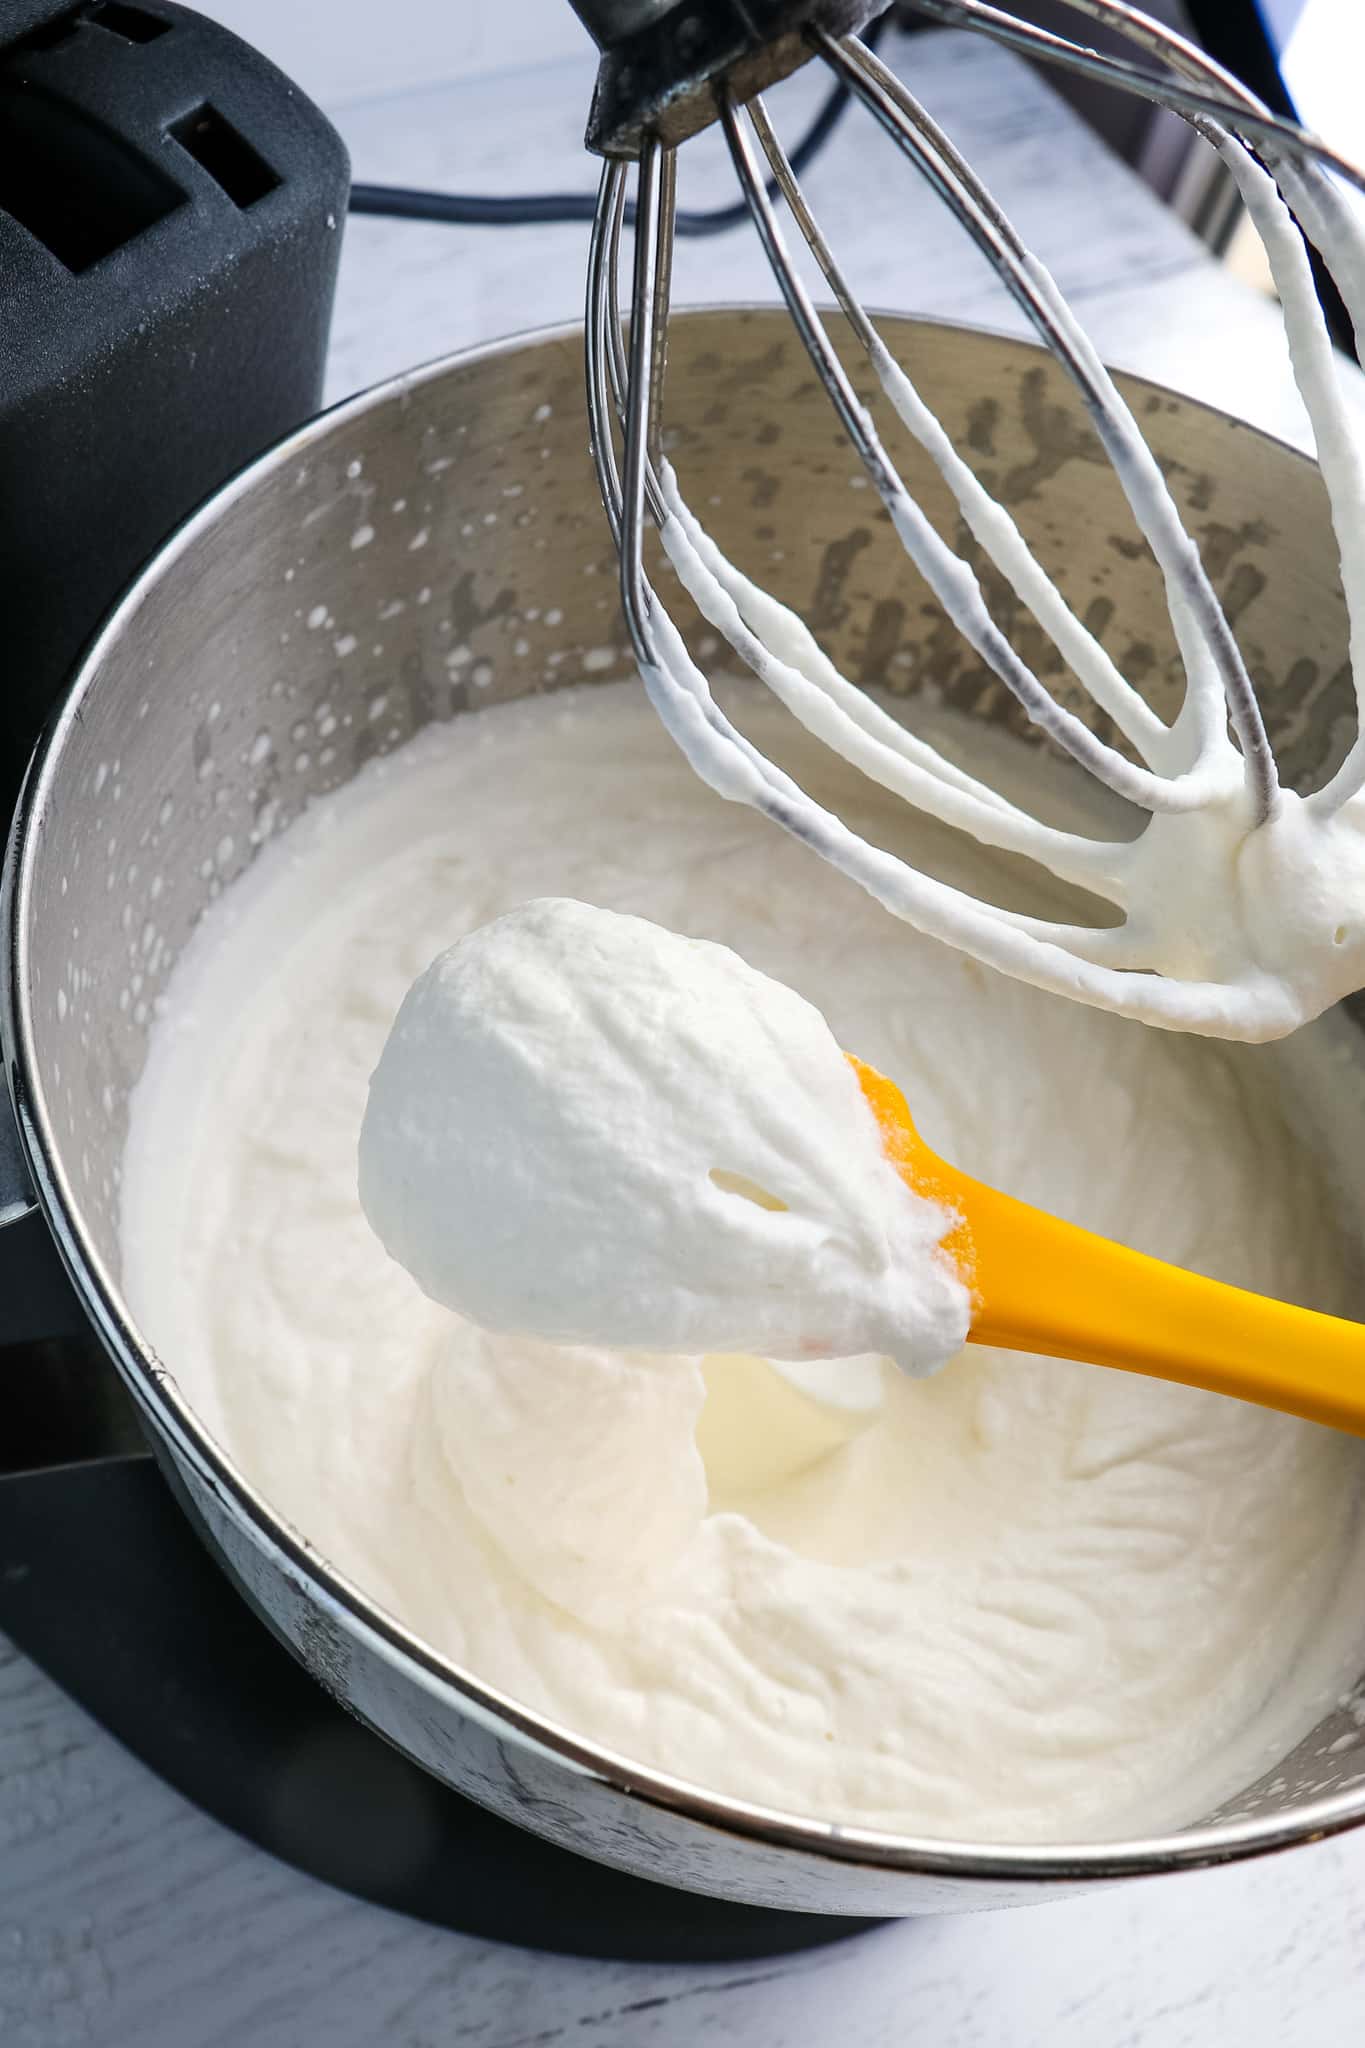 Homemade cool whip recipe in mixing bowl, with scoop of cream.